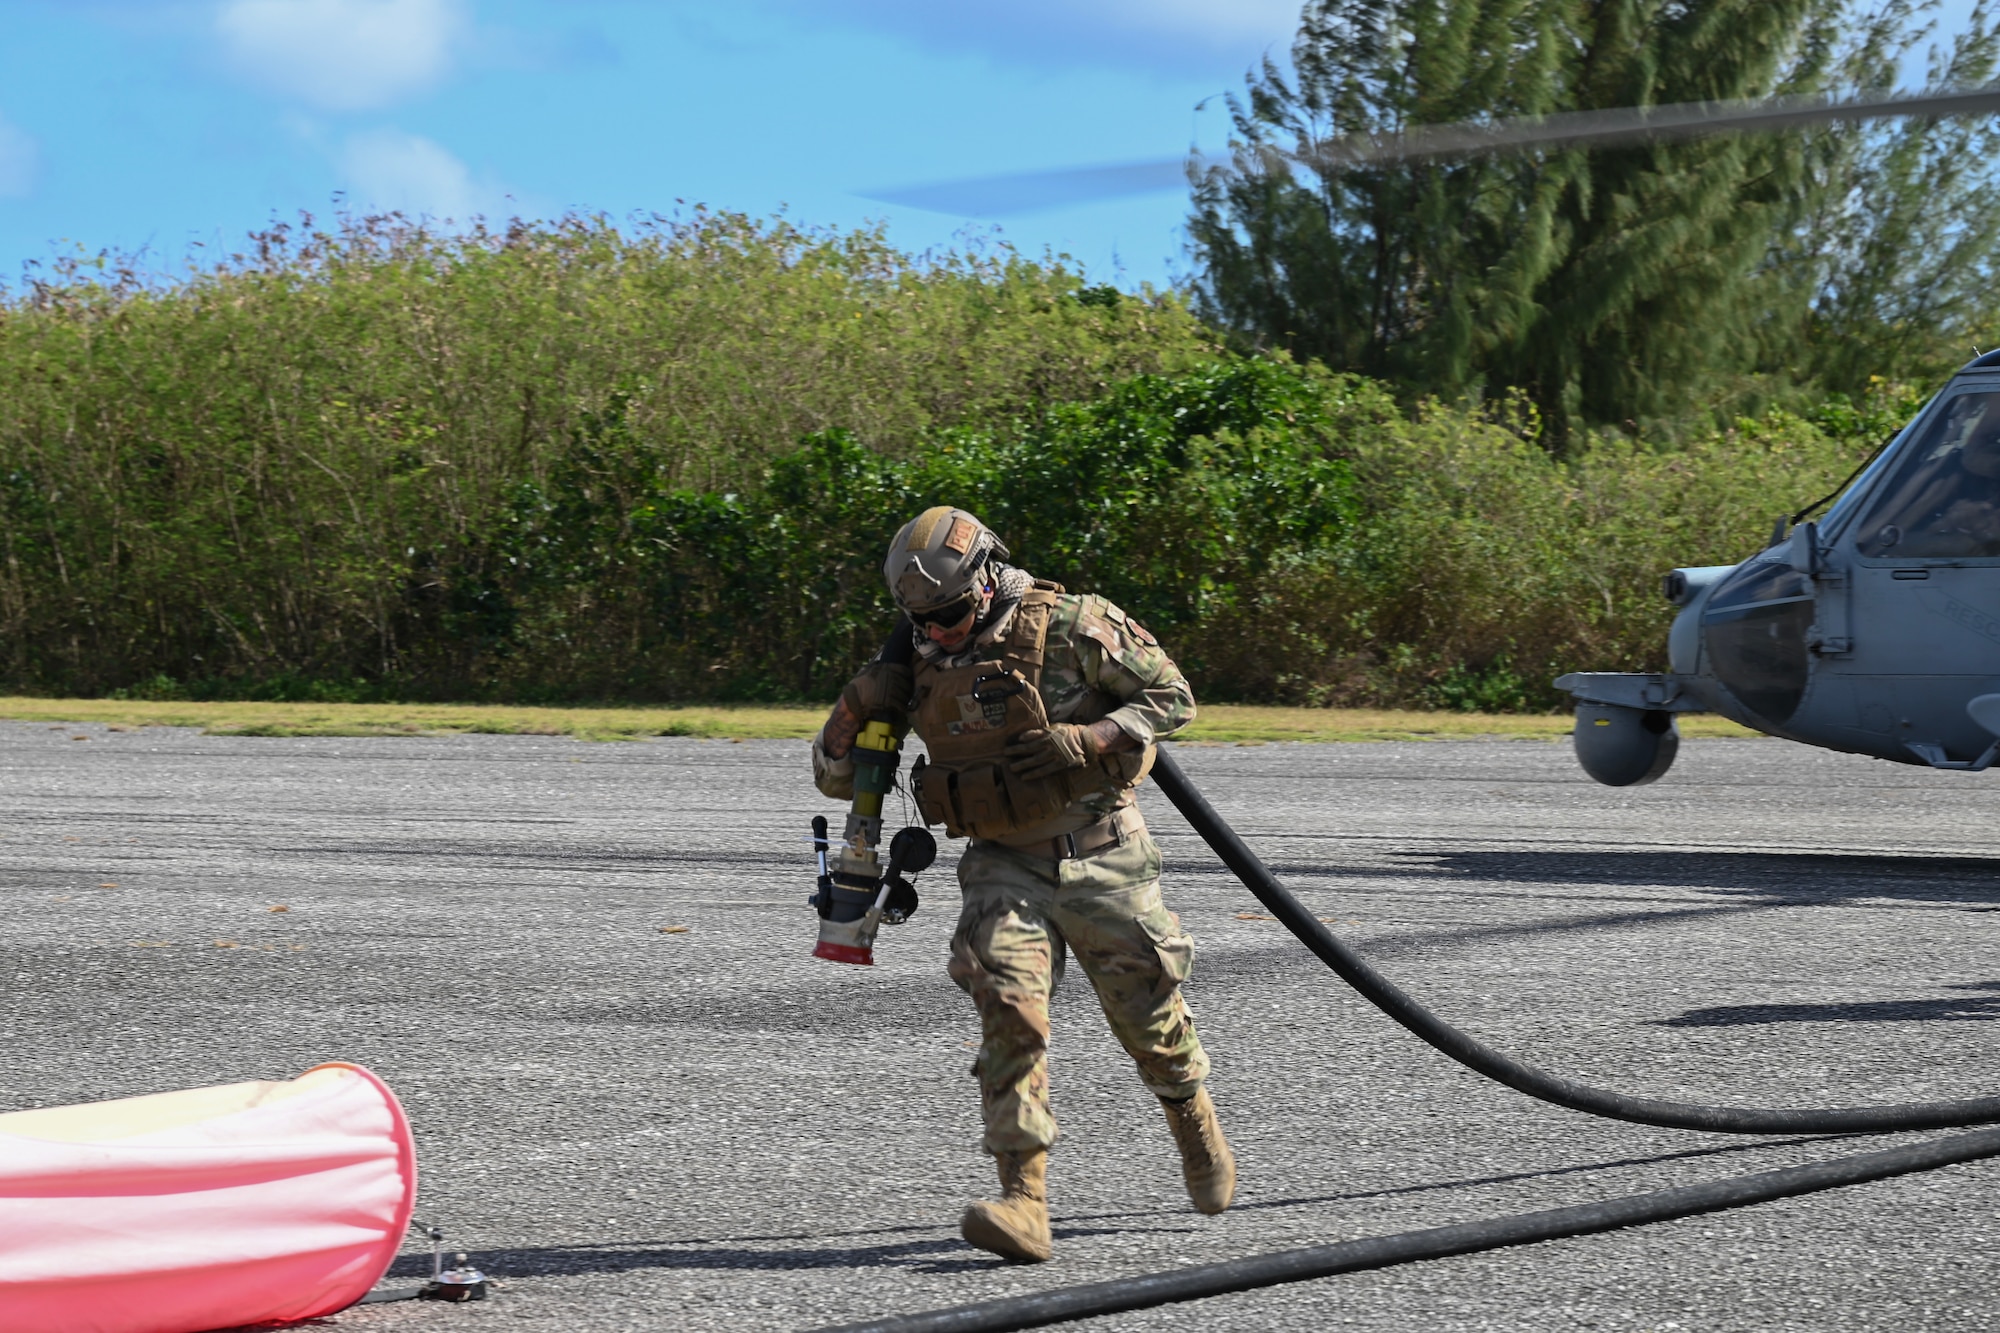 An Airman runs across the airfield with a fuel injection hose on his back.